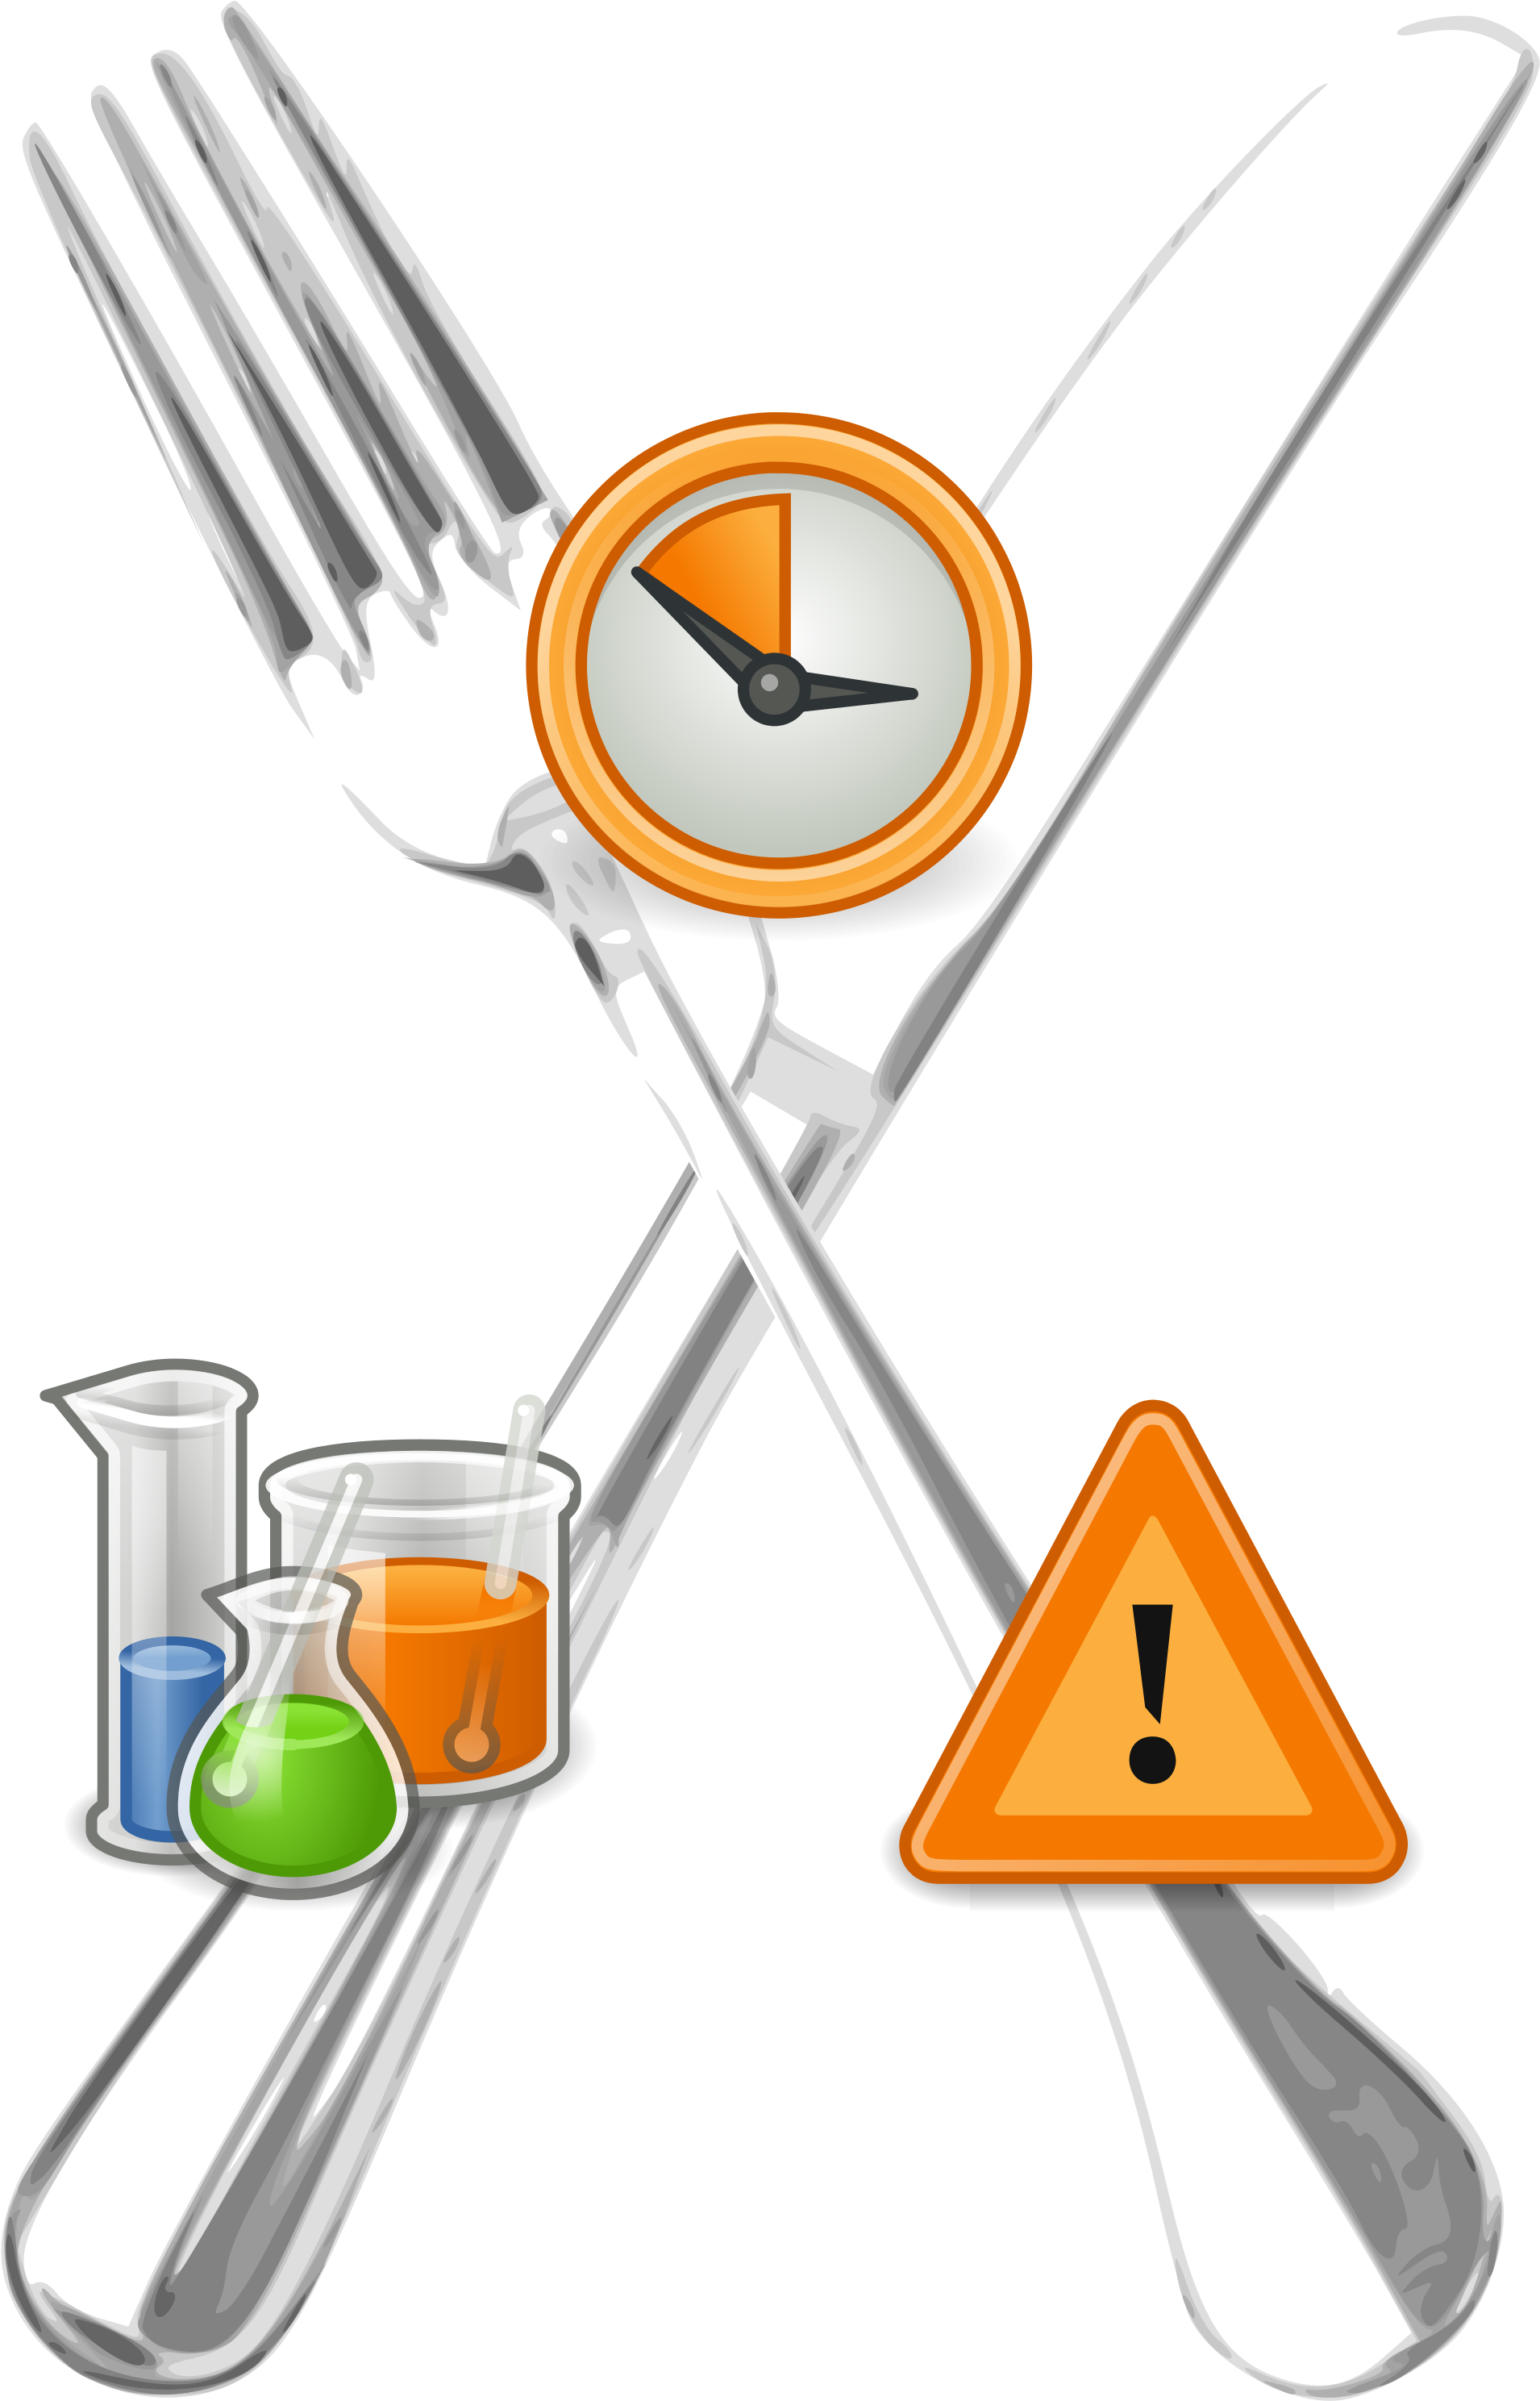 Food Safety Wallpapers - Food Safety (2000x3000)